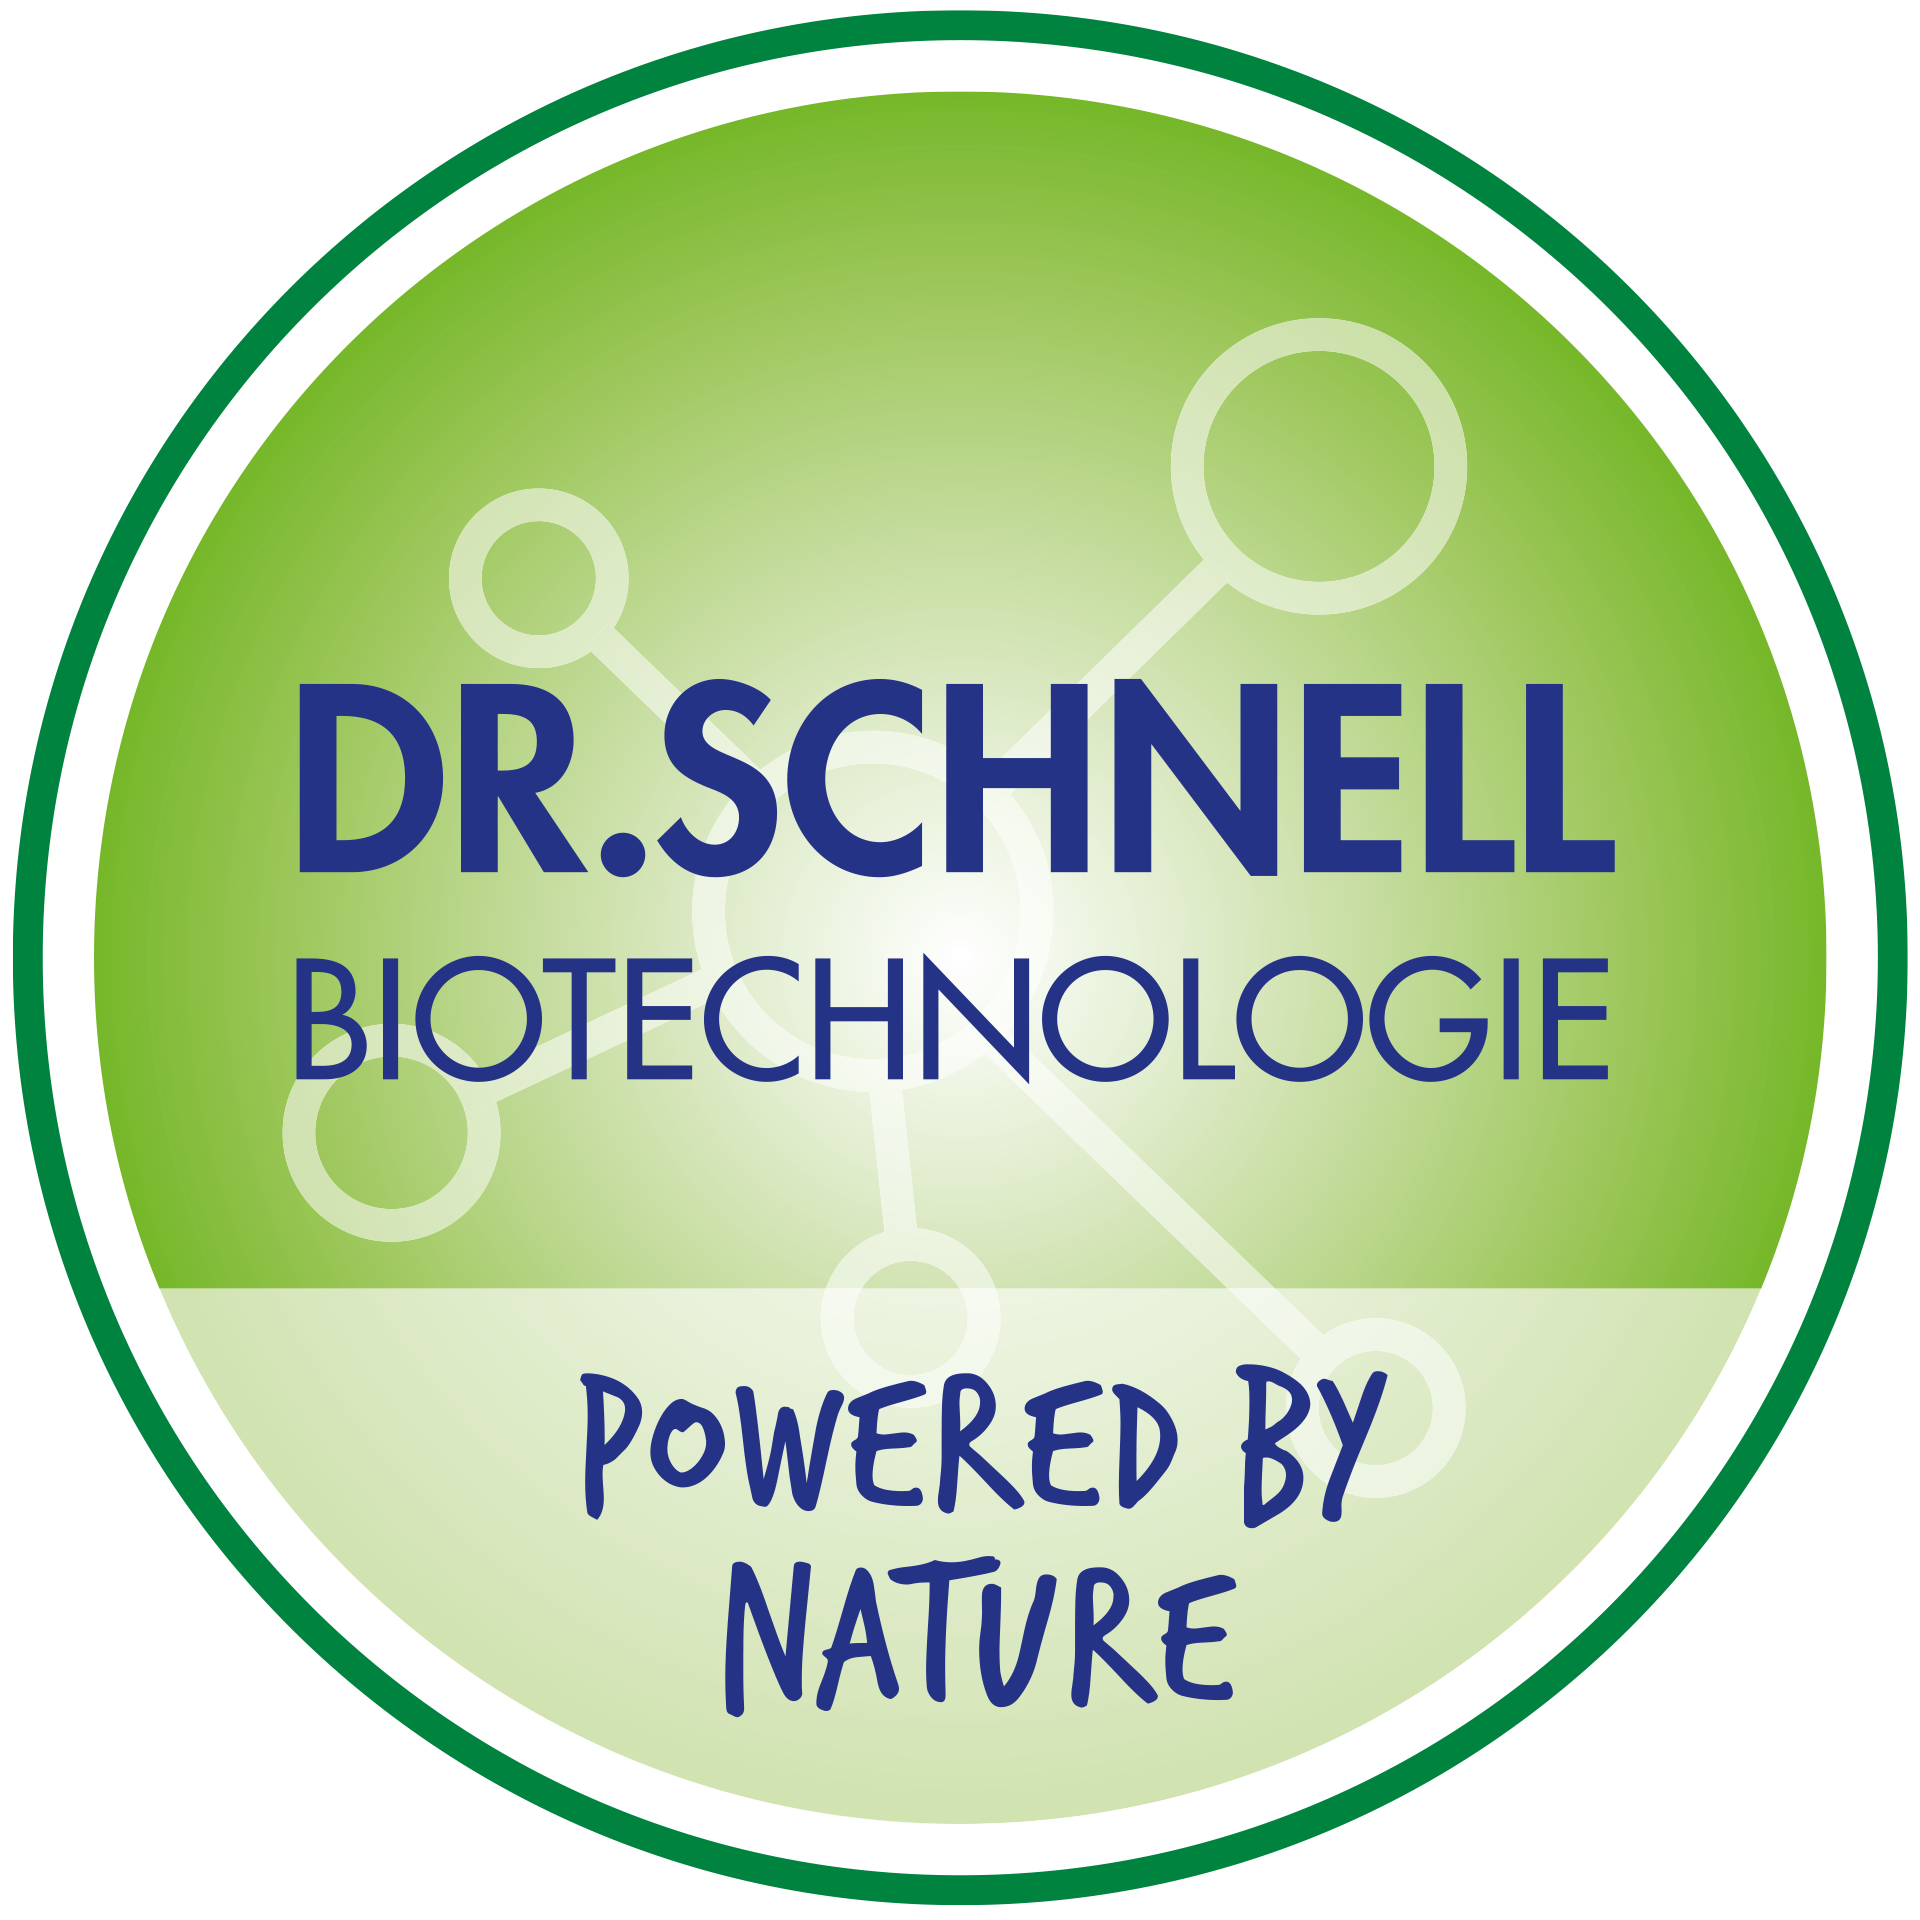 DR.SCHNELL Biotechnologie powered by Nature